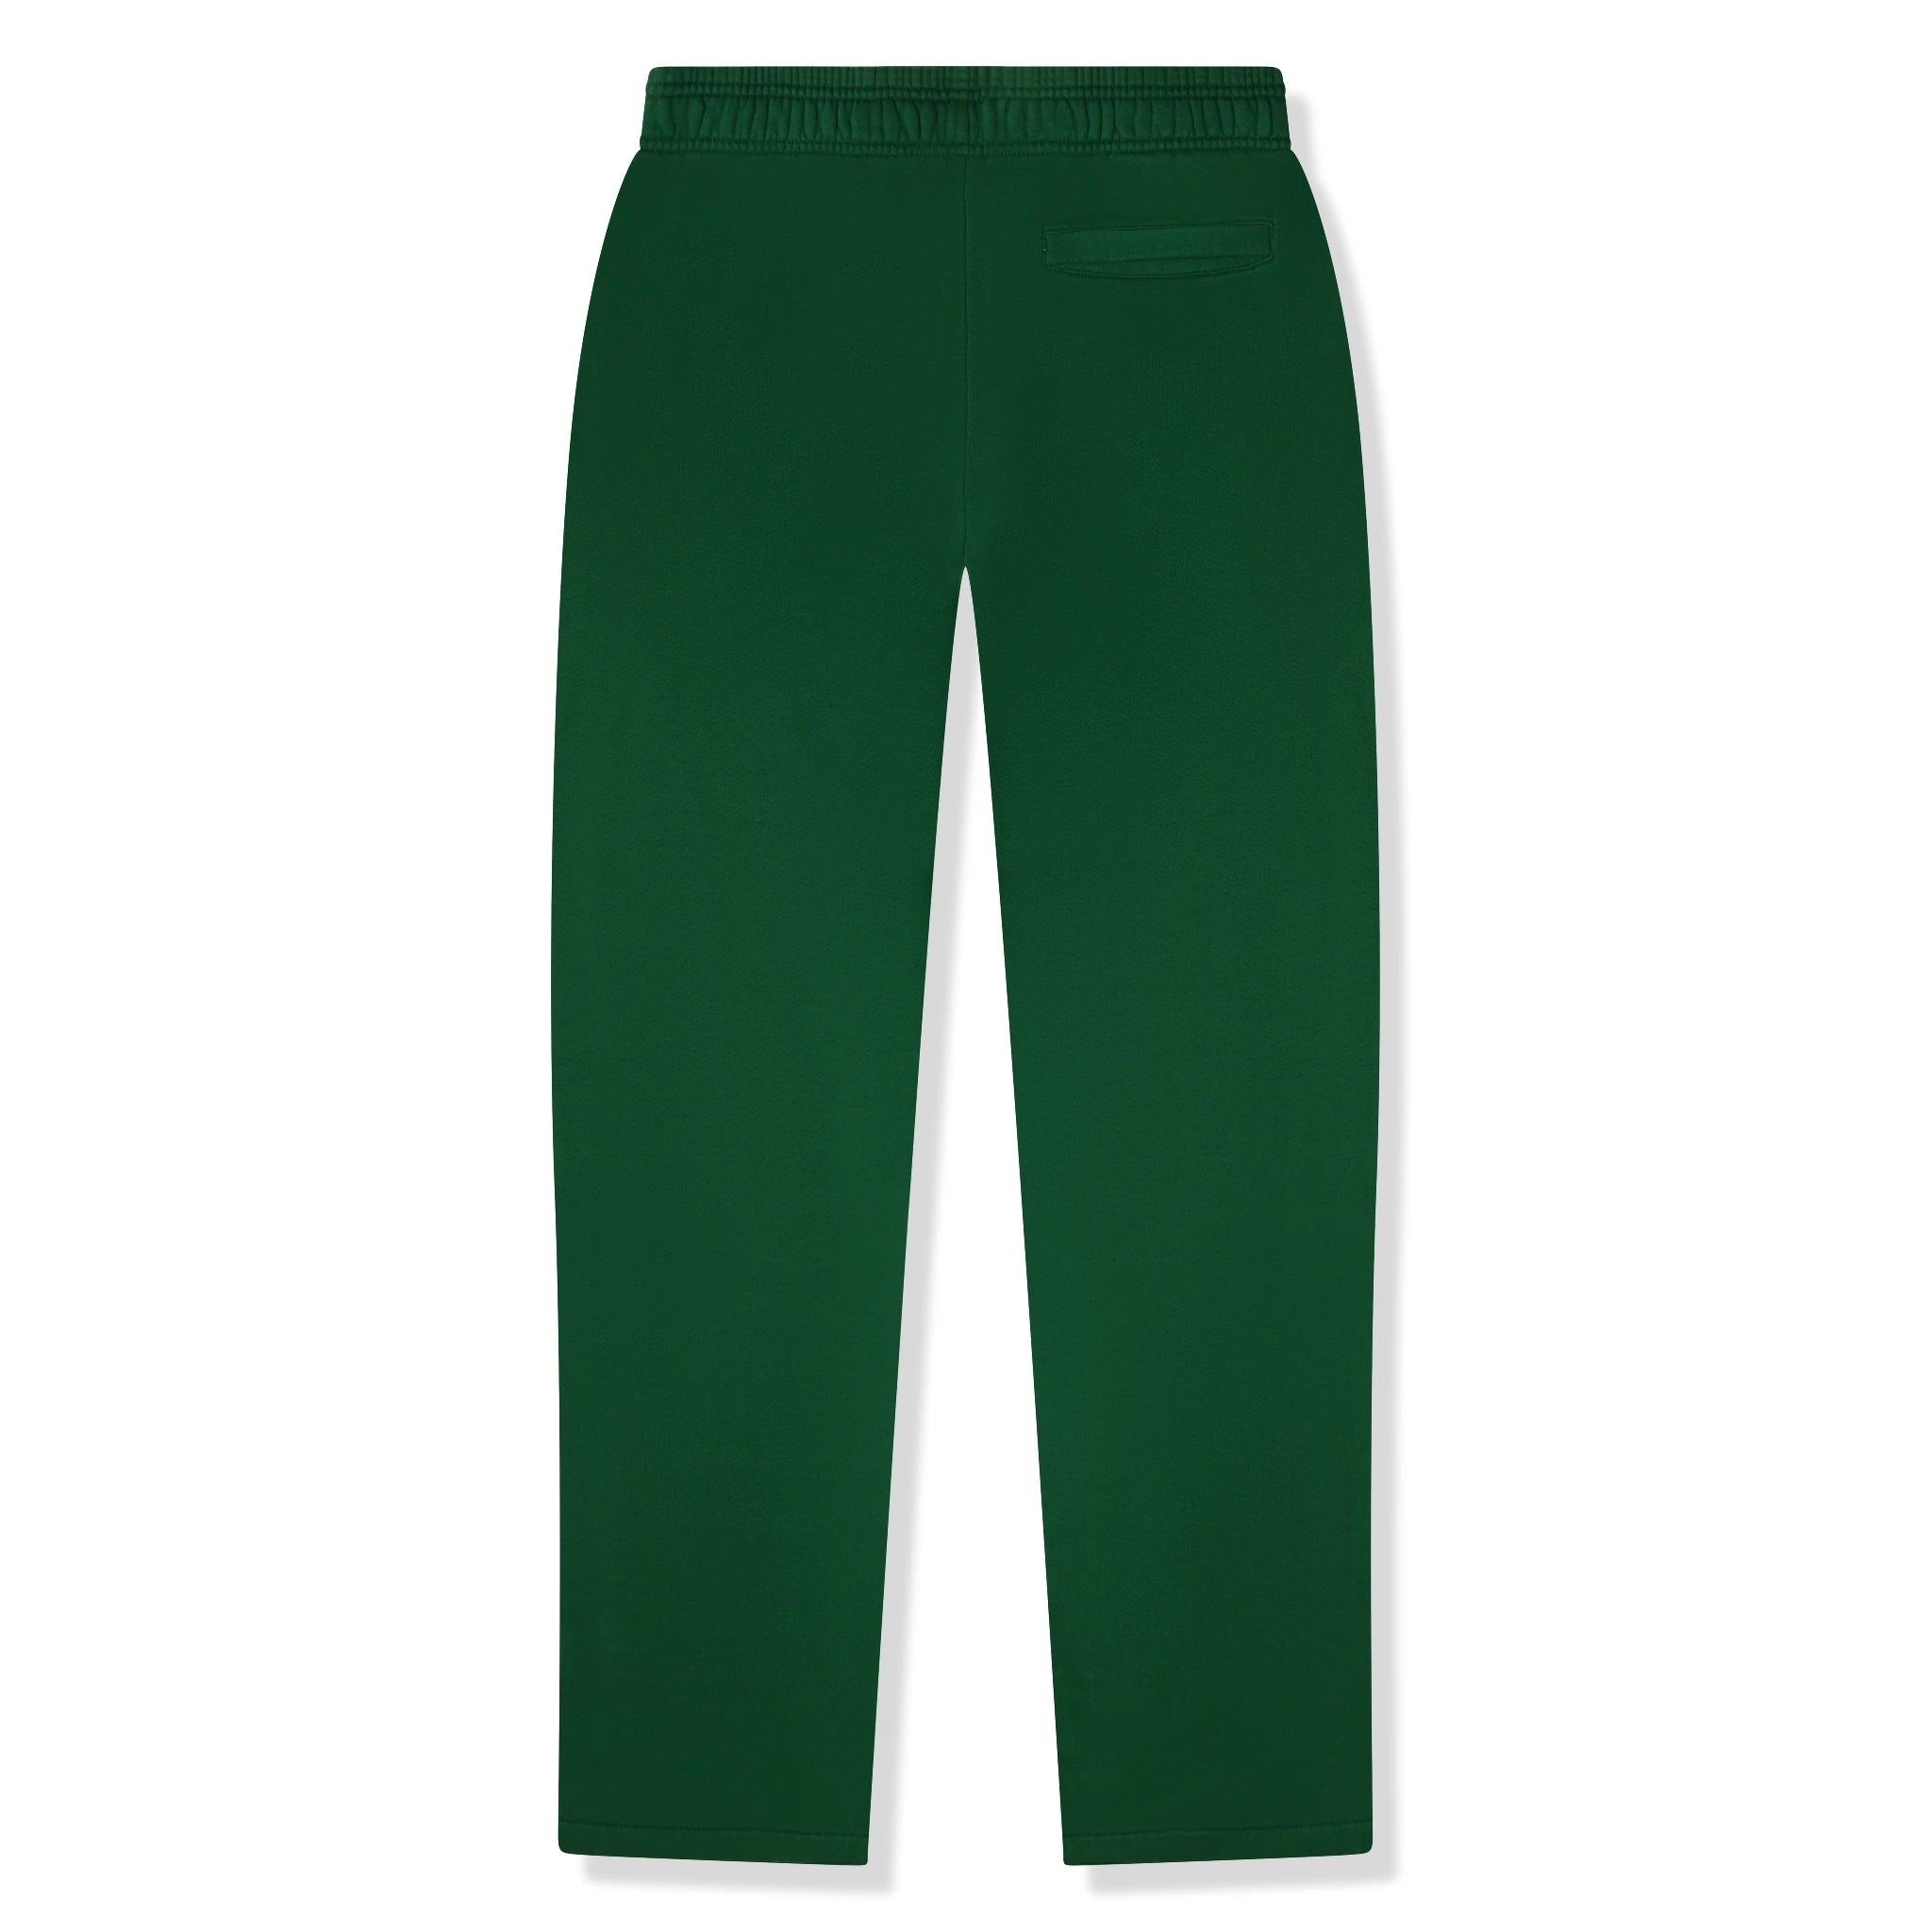 Back view of Eric Emanuel EE Basic Green White Sweatpants